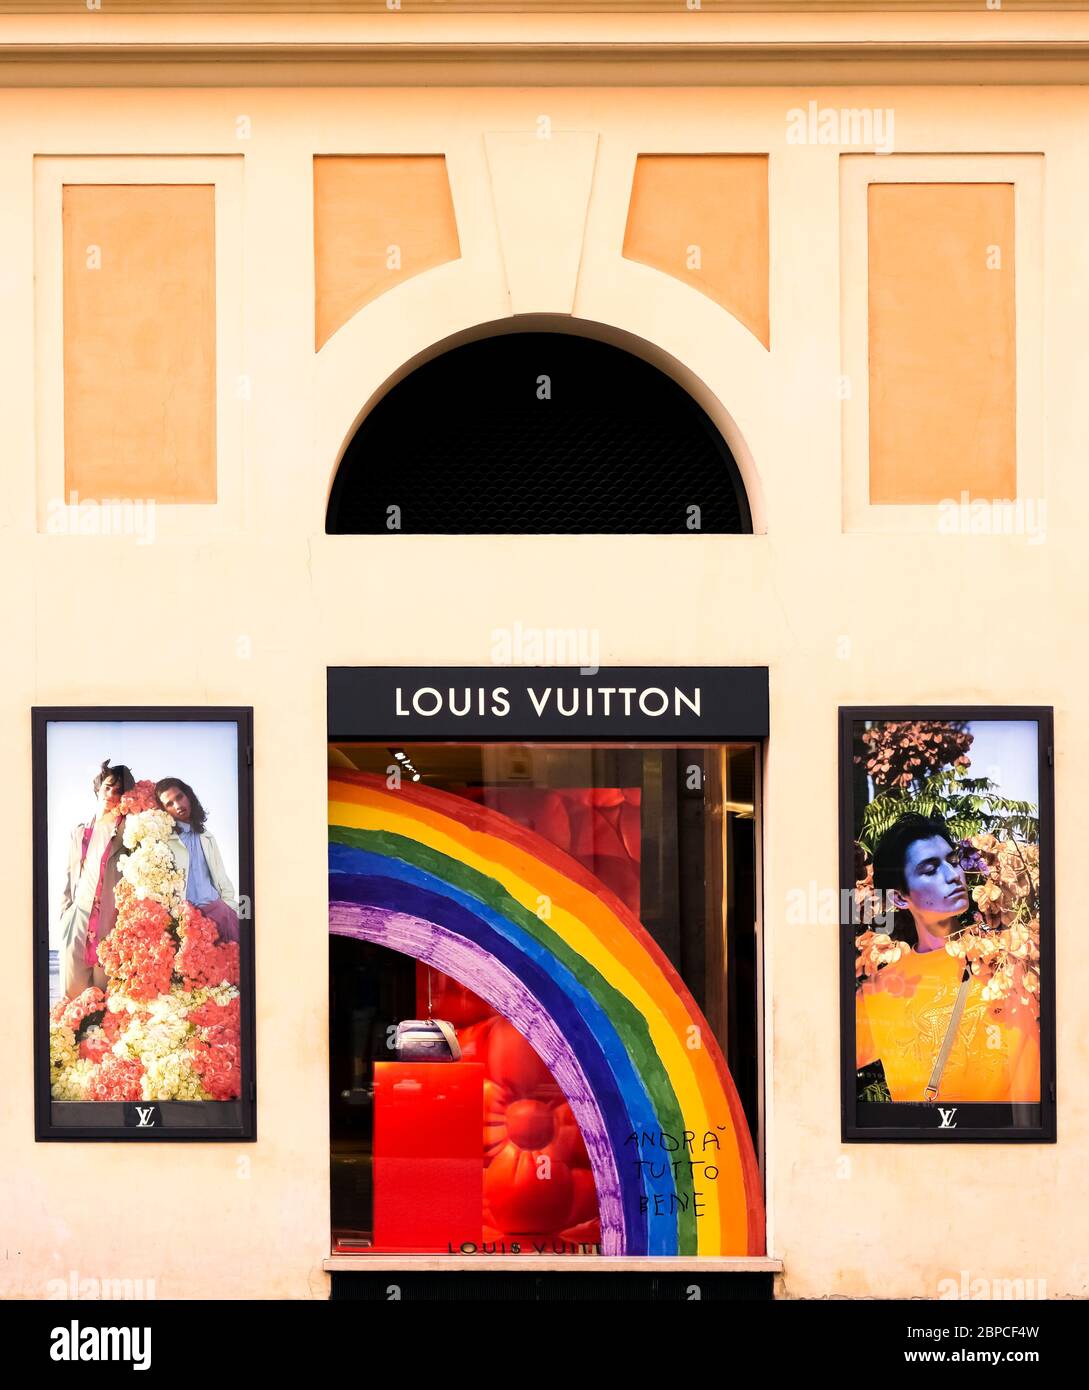 Louis Vuitton flagship store during the lockdown for coronavirus covid 19. Luxury shopping. Rainbow 'Andrà tutto bene (everything will be all right)'. Rome at the time of Covid 19. Italy, Europe, European Union, EU. Stock Photo